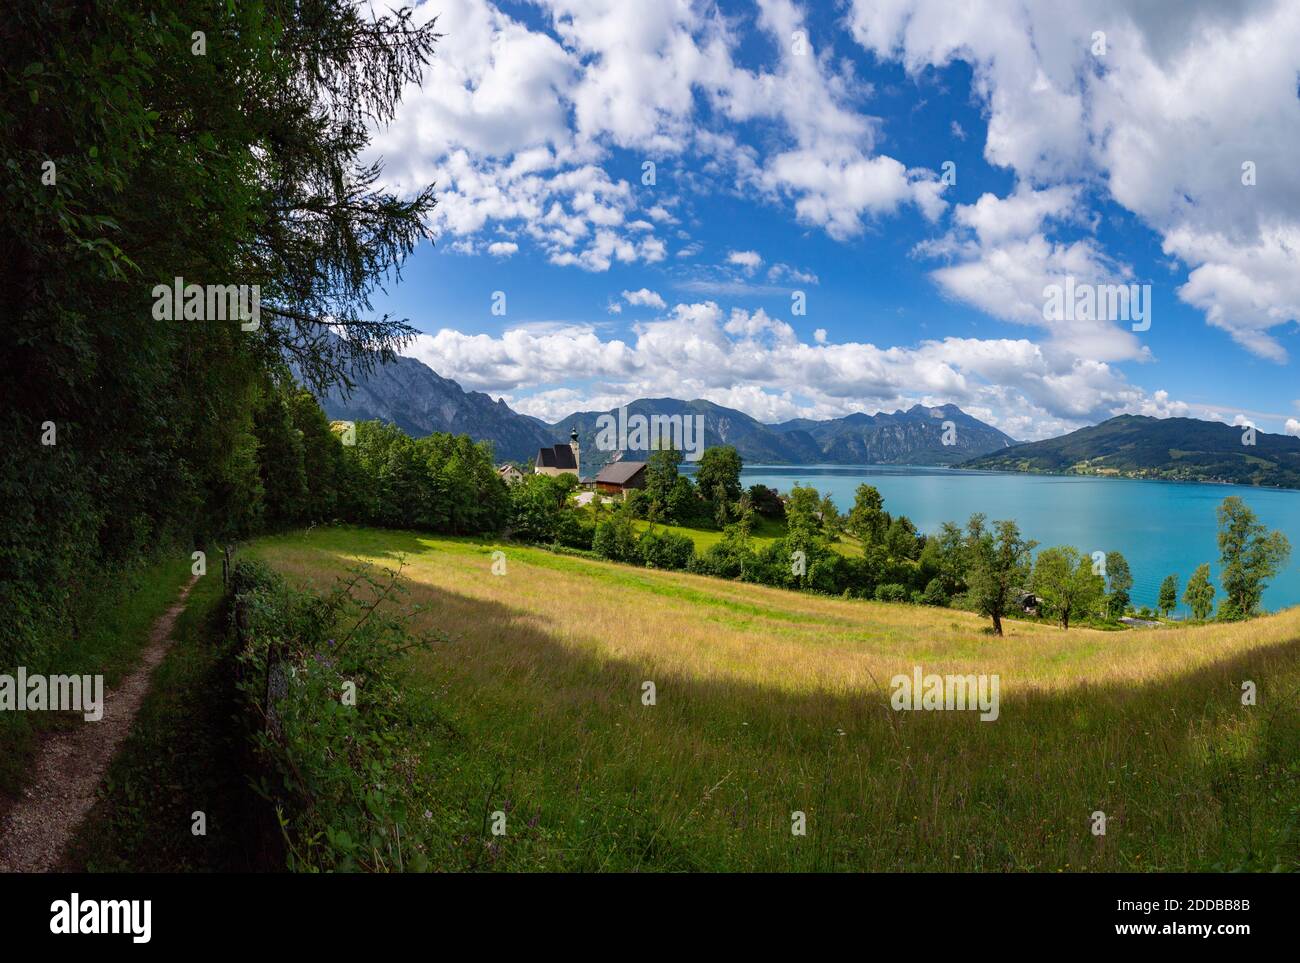 Austria, Upper Austria, Steinbach am Attersee, Footpath stretching along edge of countryside meadow in summer with Lake Atter in background Stock Photo